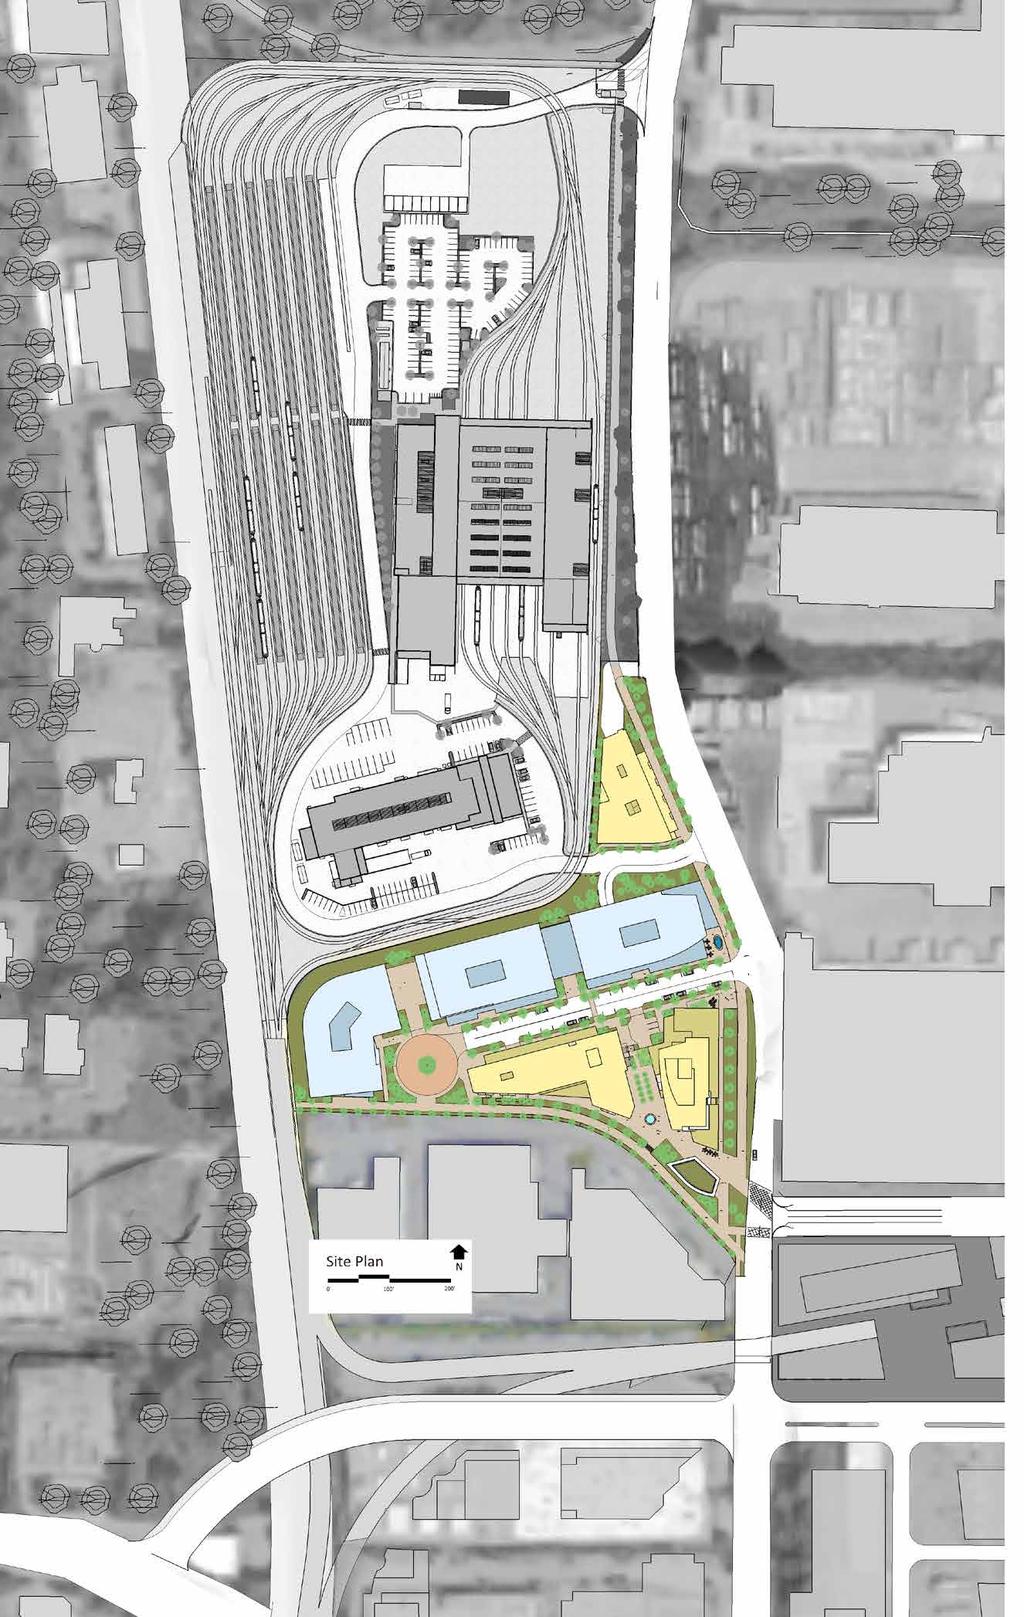 TOD MASTER DEVELOPMENT PLAN PLAN ERC North Connection Future BPS Elementary School Zoning: 120th Ave NE BR-OR-2,